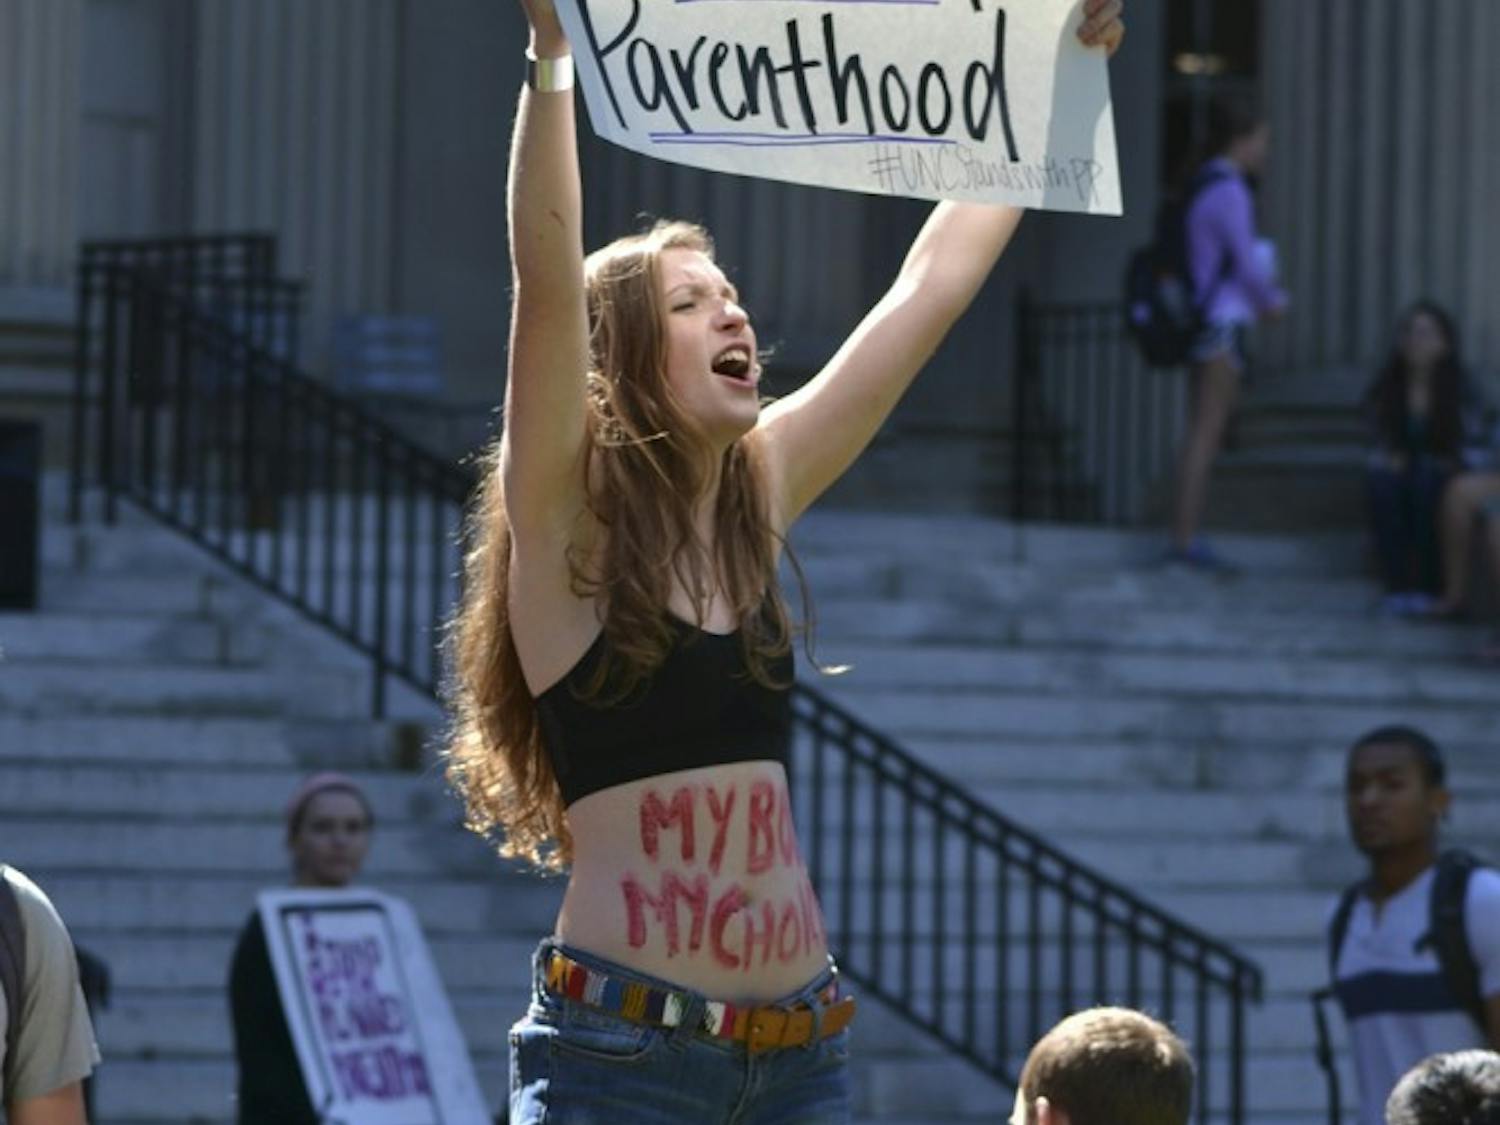 Rachel Allen, a sophomore at UNC, grabs the attention of passersby to encourage the discussion of Planned Parenthood.